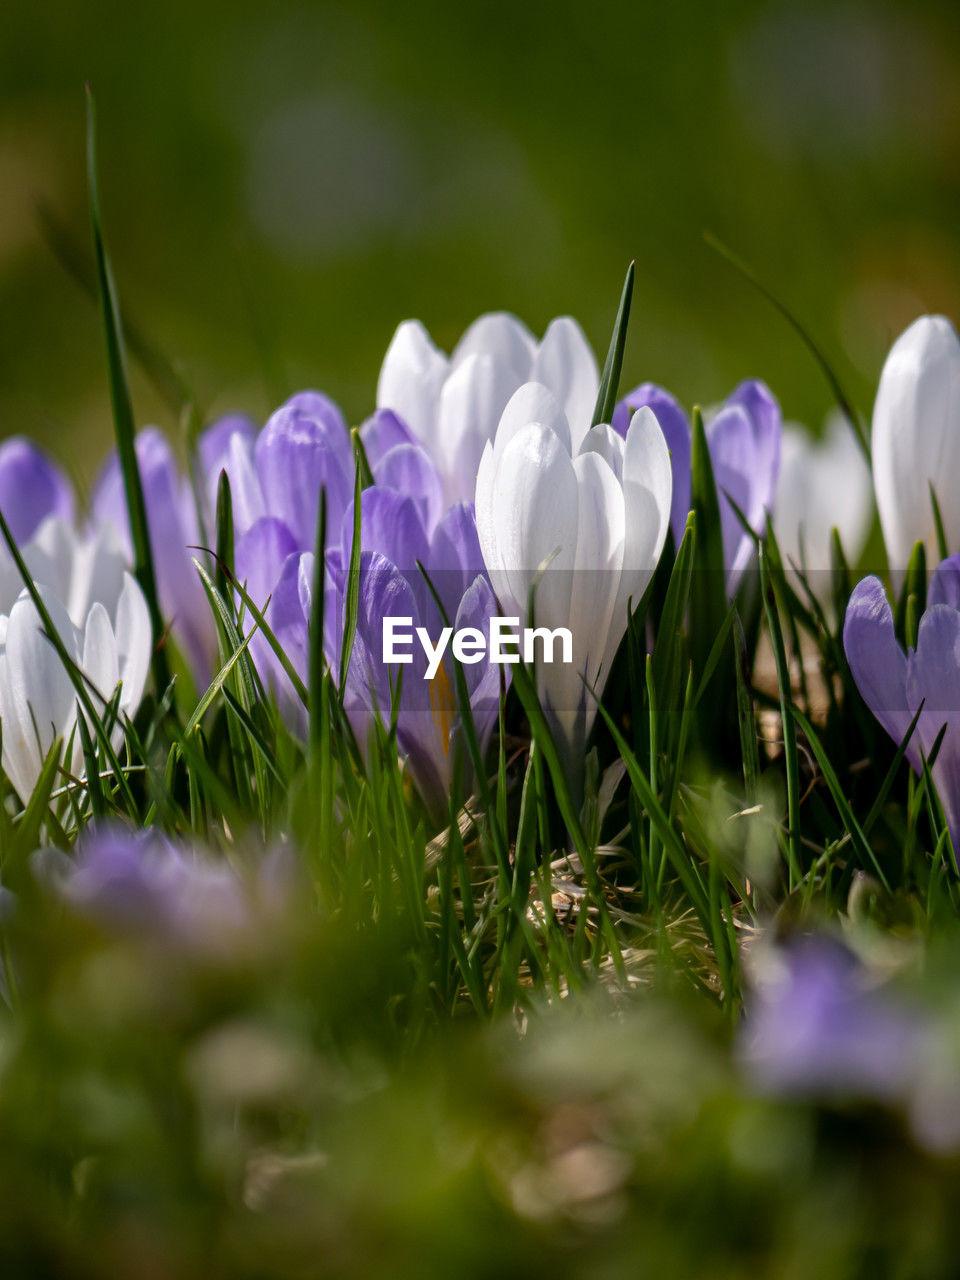 plant, flower, flowering plant, nature, beauty in nature, freshness, purple, selective focus, macro photography, crocus, fragility, green, grass, close-up, springtime, growth, petal, no people, iris, meadow, blossom, flower head, outdoors, inflorescence, white, field, land, wildflower, sunlight, day, plain